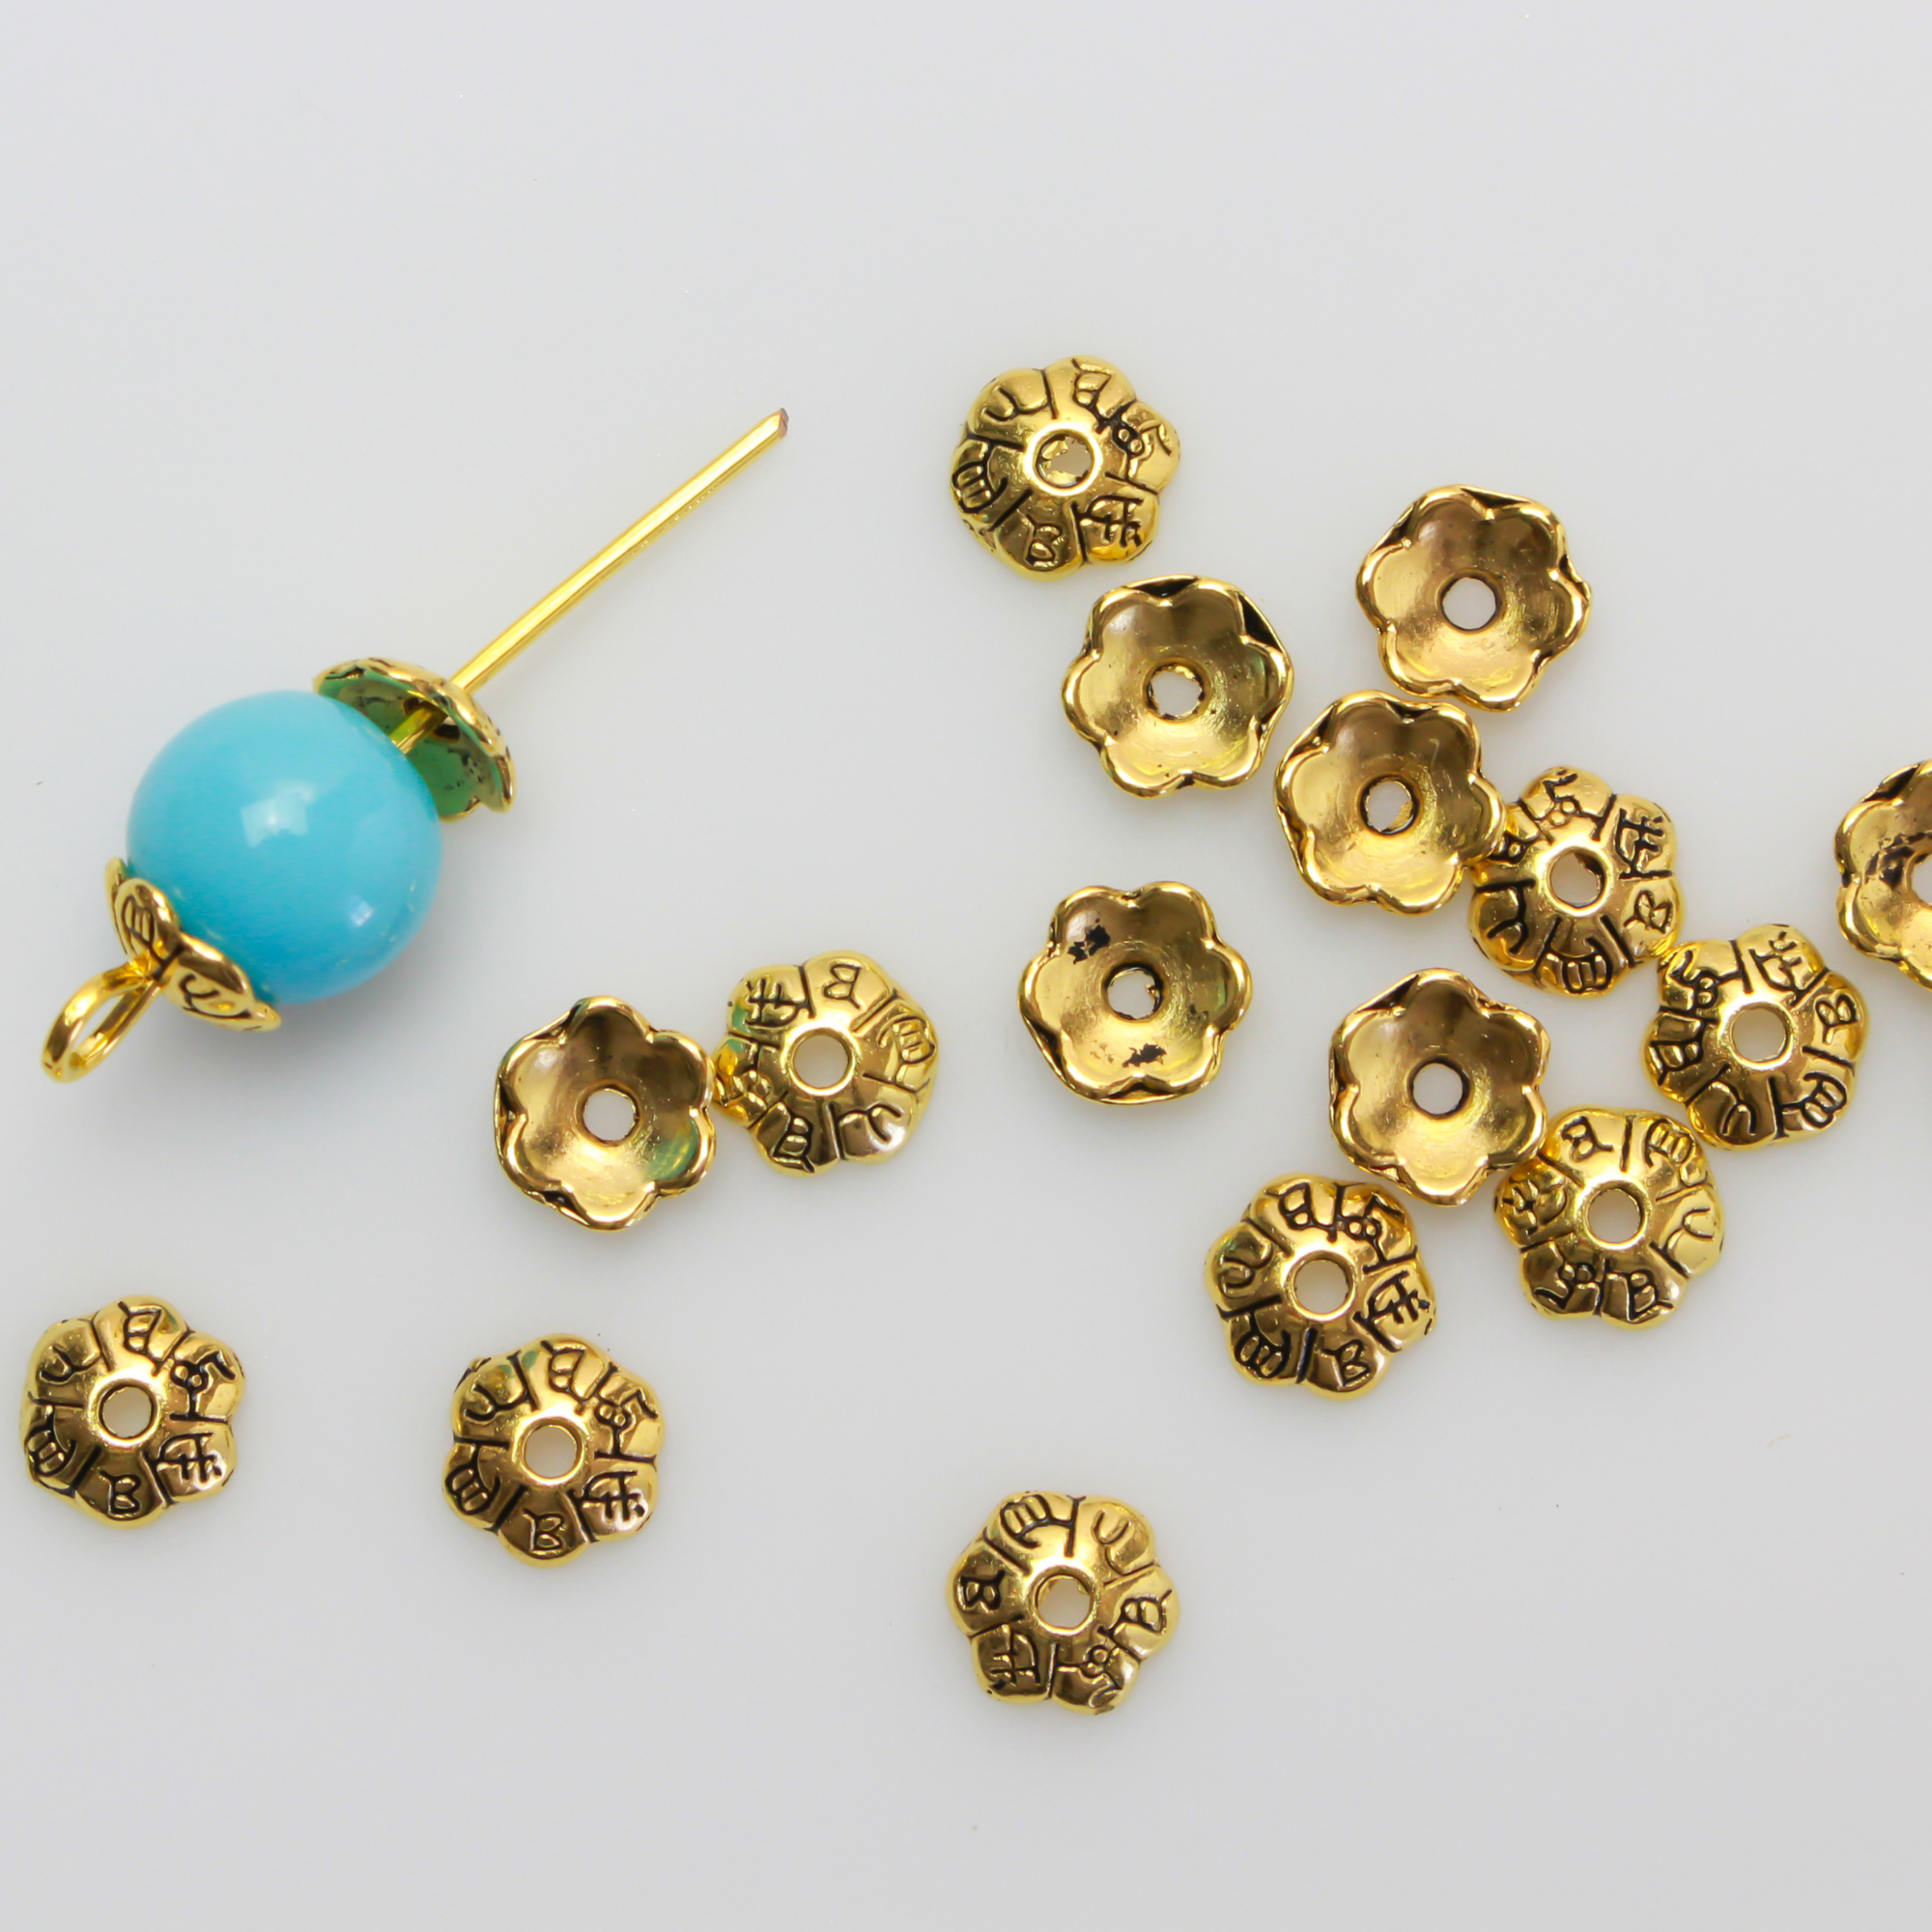 5mm Tiny Flower Bead Caps Gold Filled (C95GF) - 20 pieces